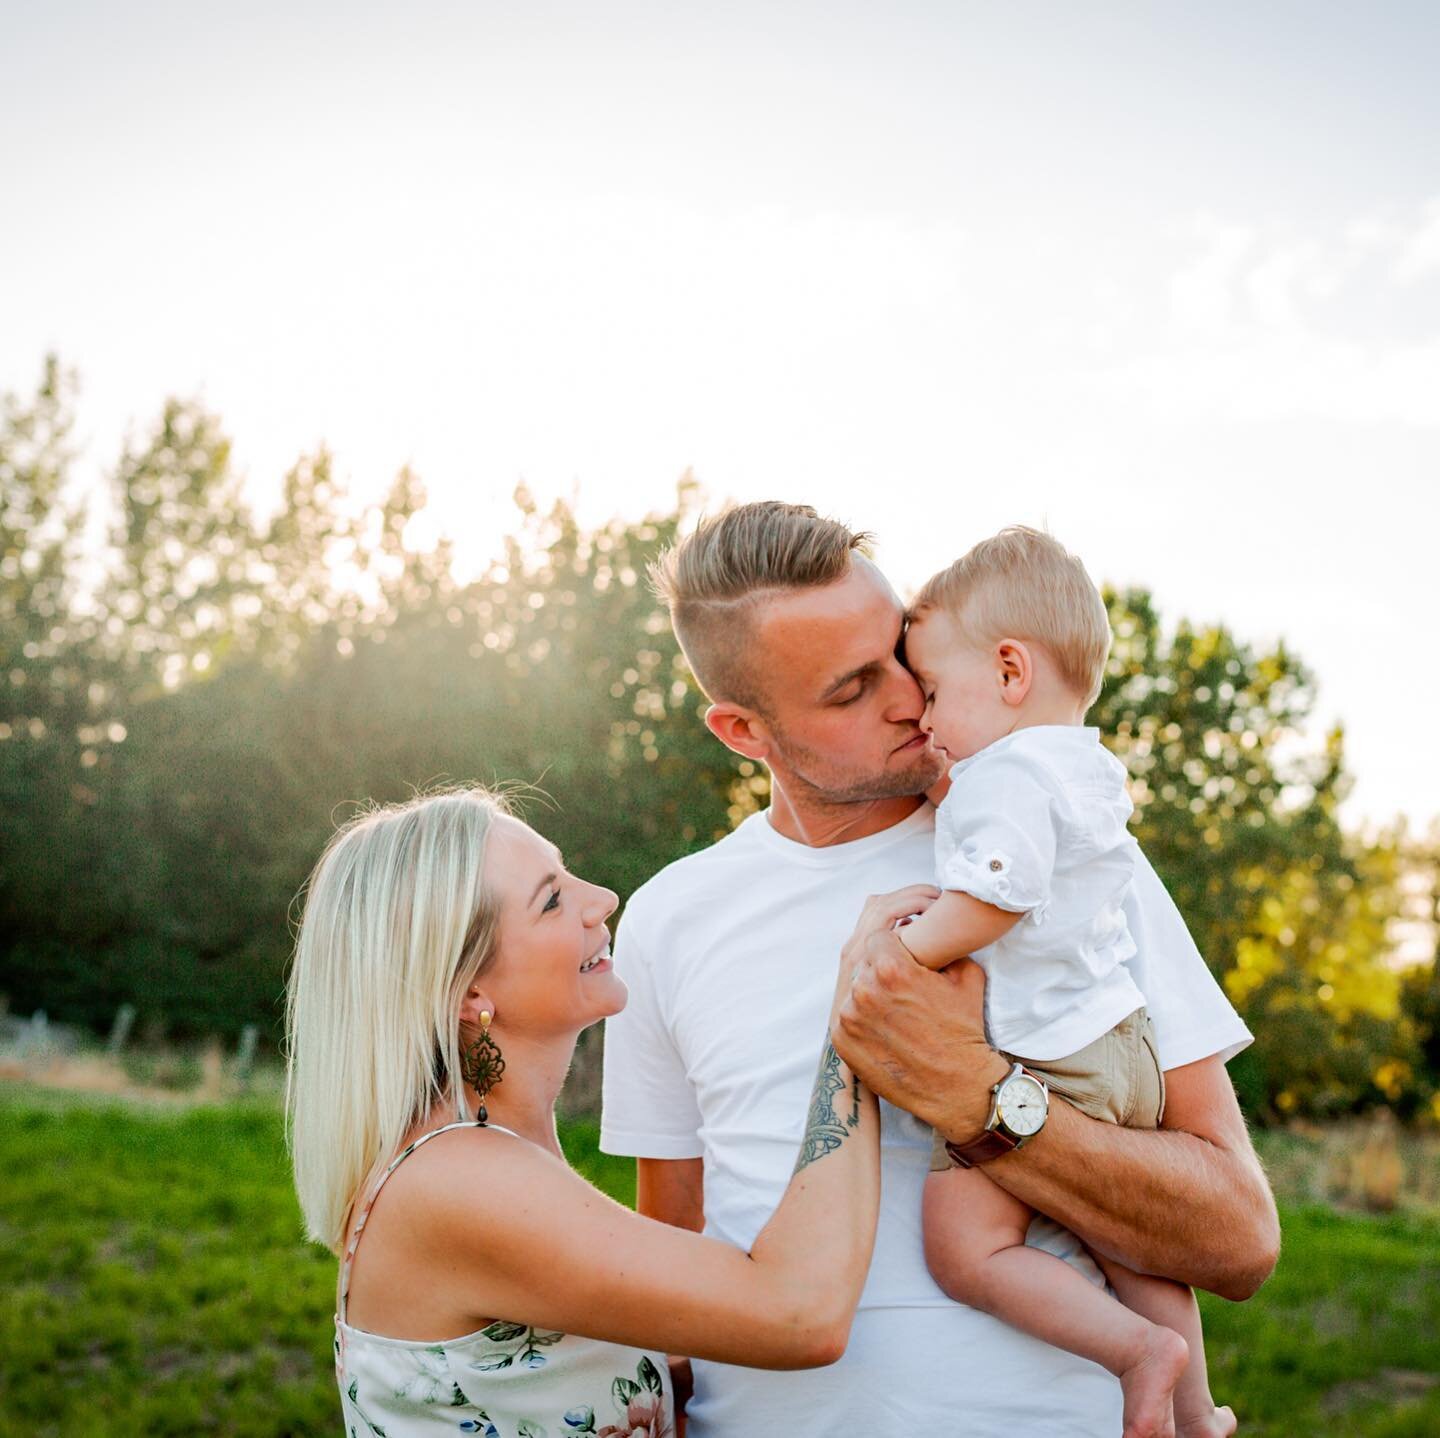 It&rsquo;s been a while since I photographed Milo, just before he turned one. What a sweetheart! 🥰
Can&rsquo;t wait to shoot like this again! 
#summerfeeling #canon #canonbelgium #family #qualitytime #familyshoot #field #summer #eveningsun #littlebo